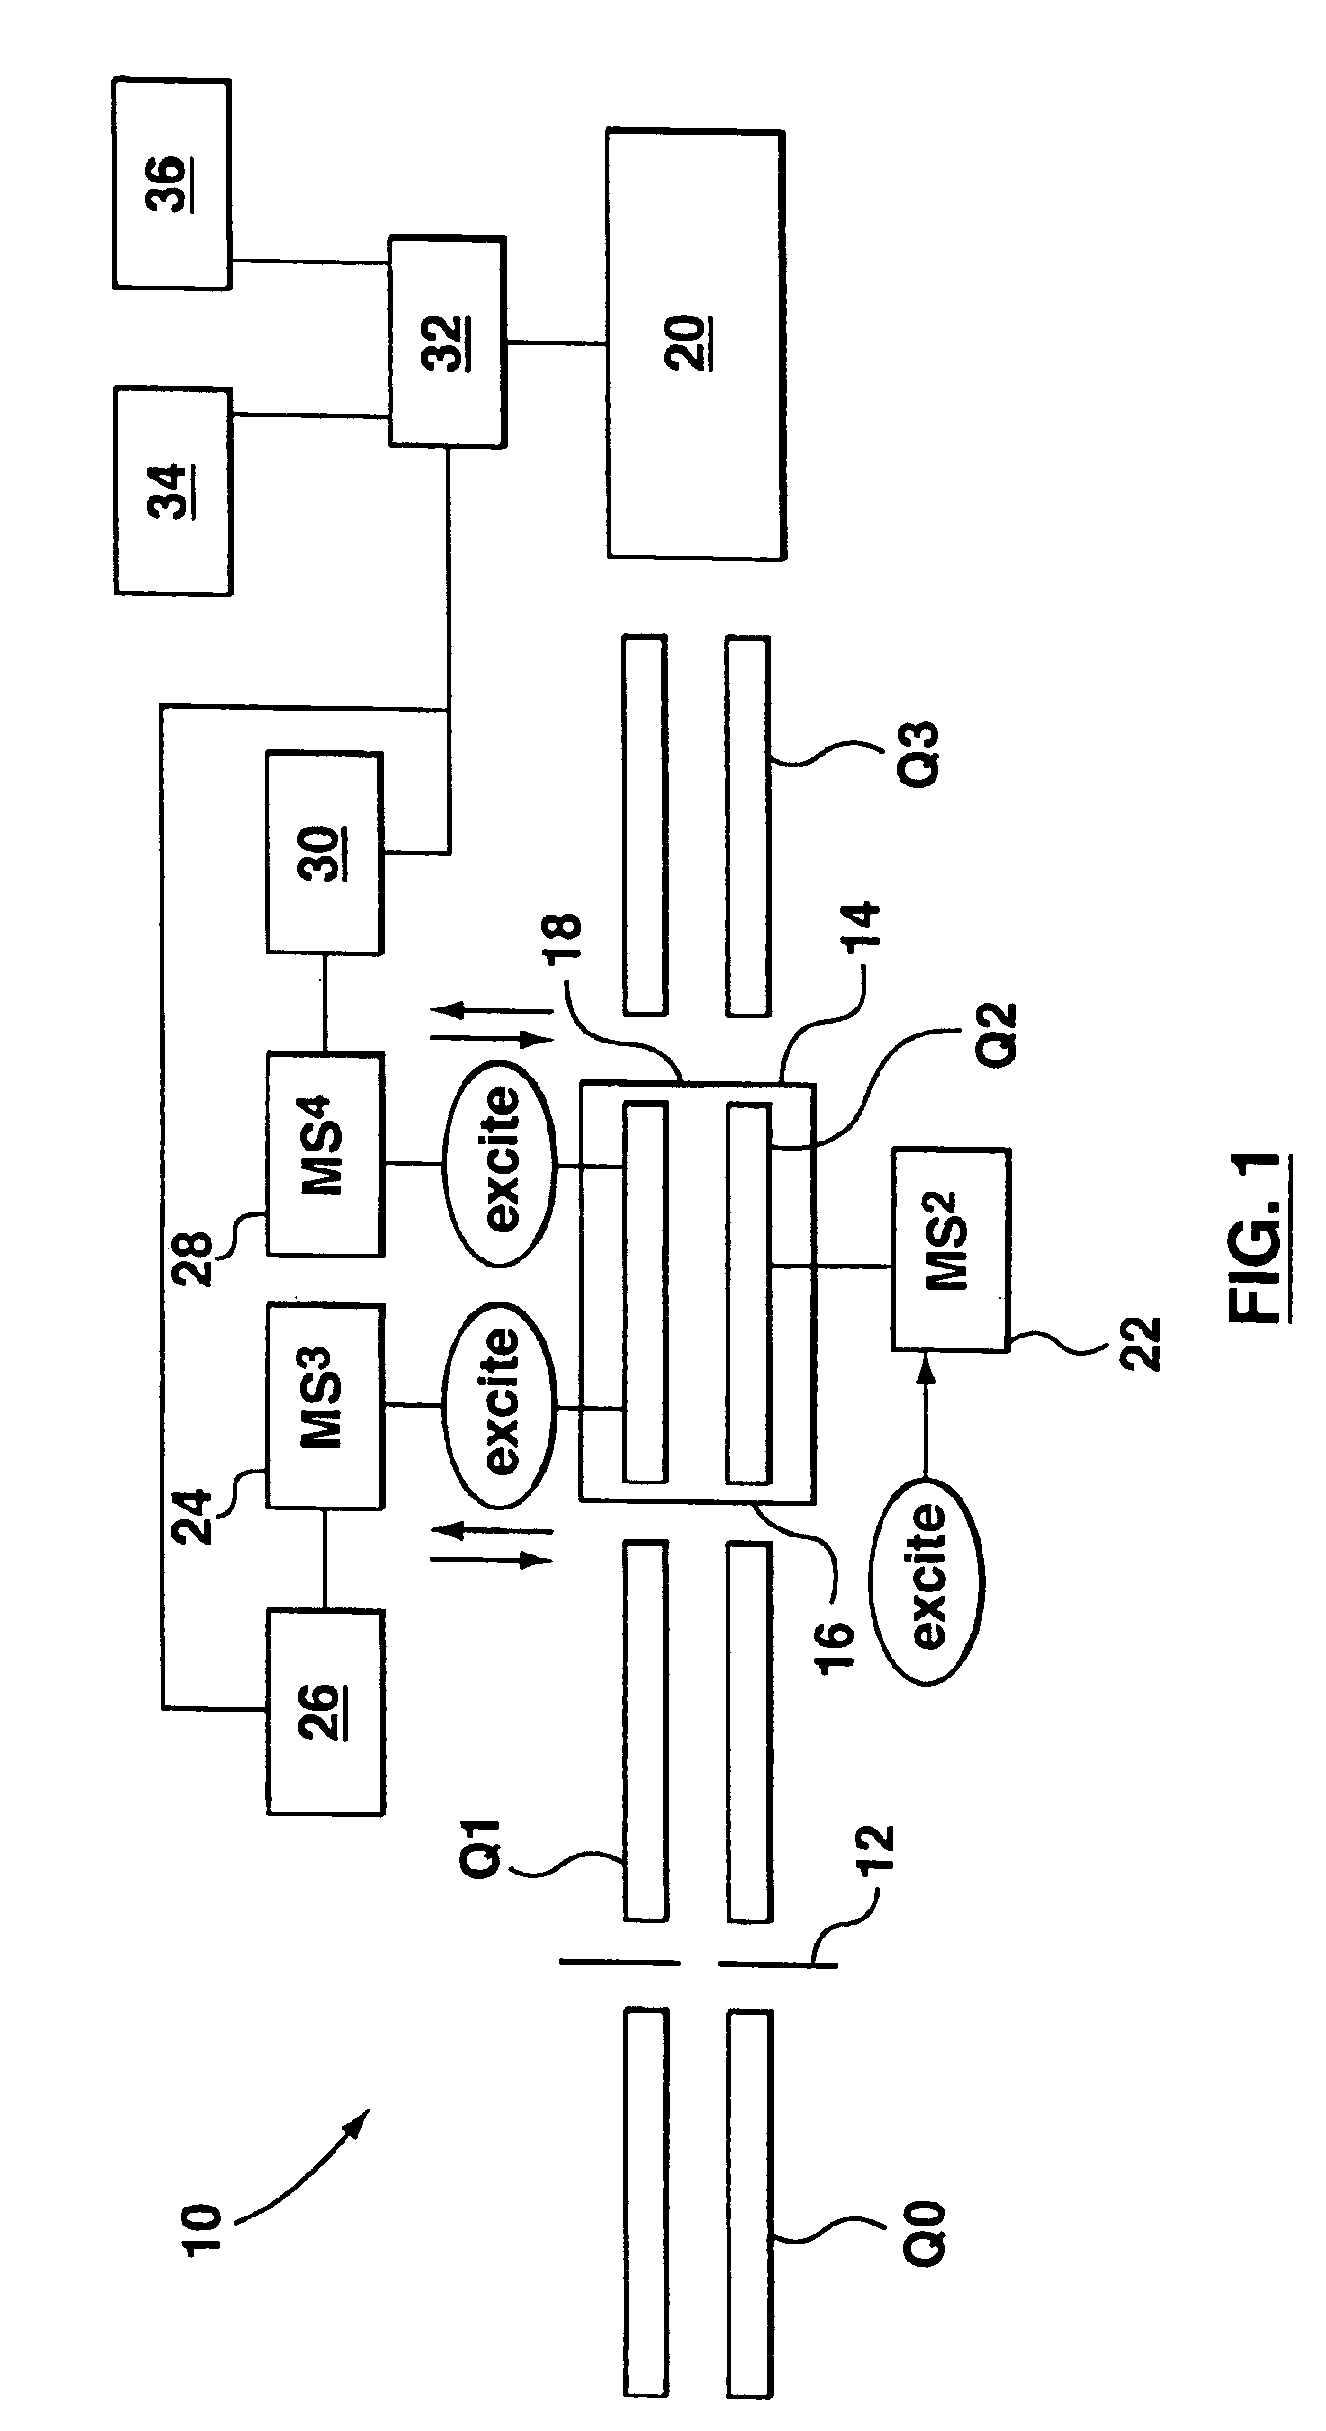 Method and apparatus for analyzing a substance using MSn analysis